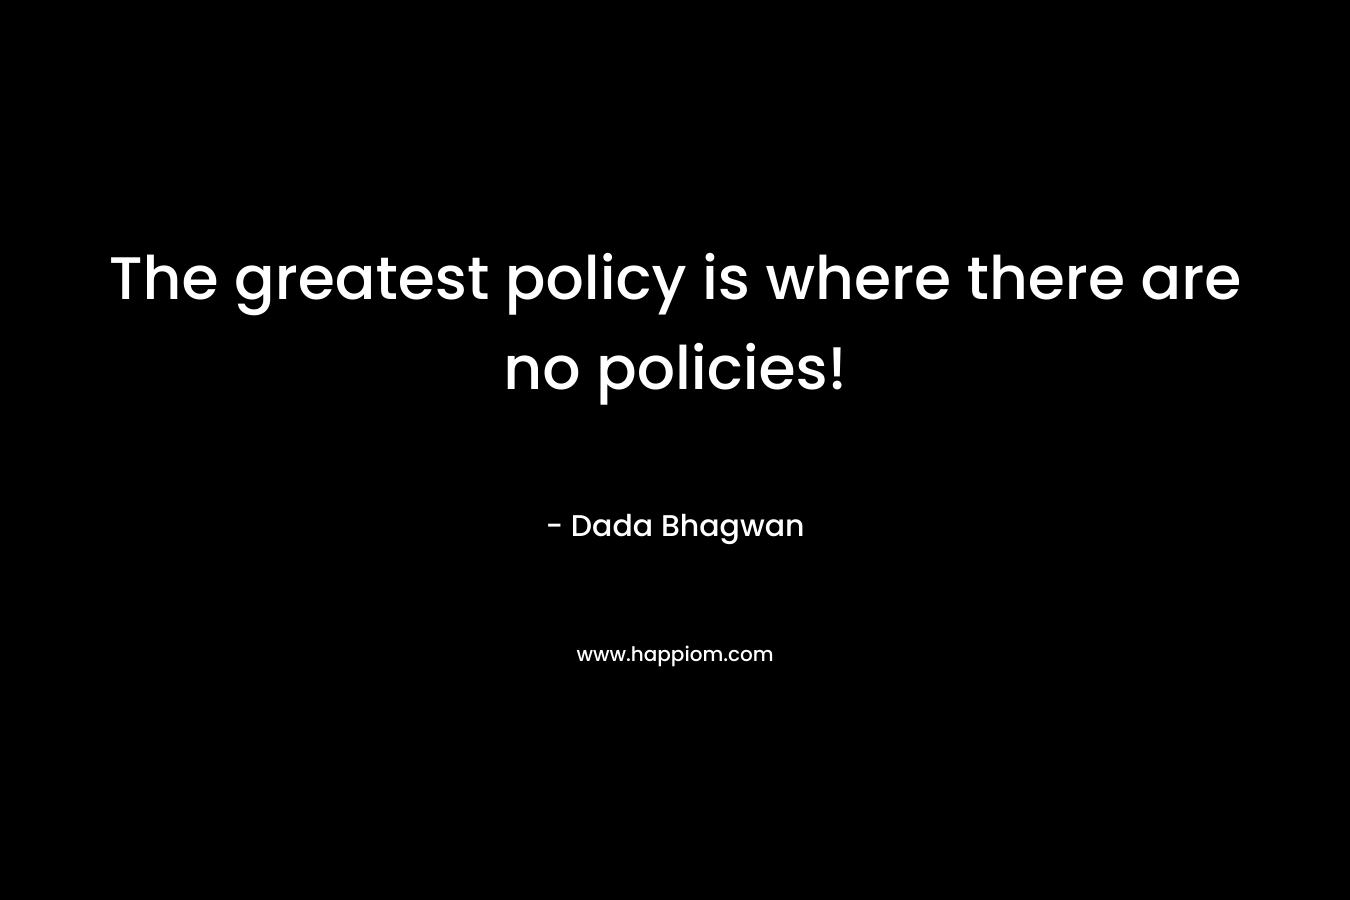 The greatest policy is where there are no policies!